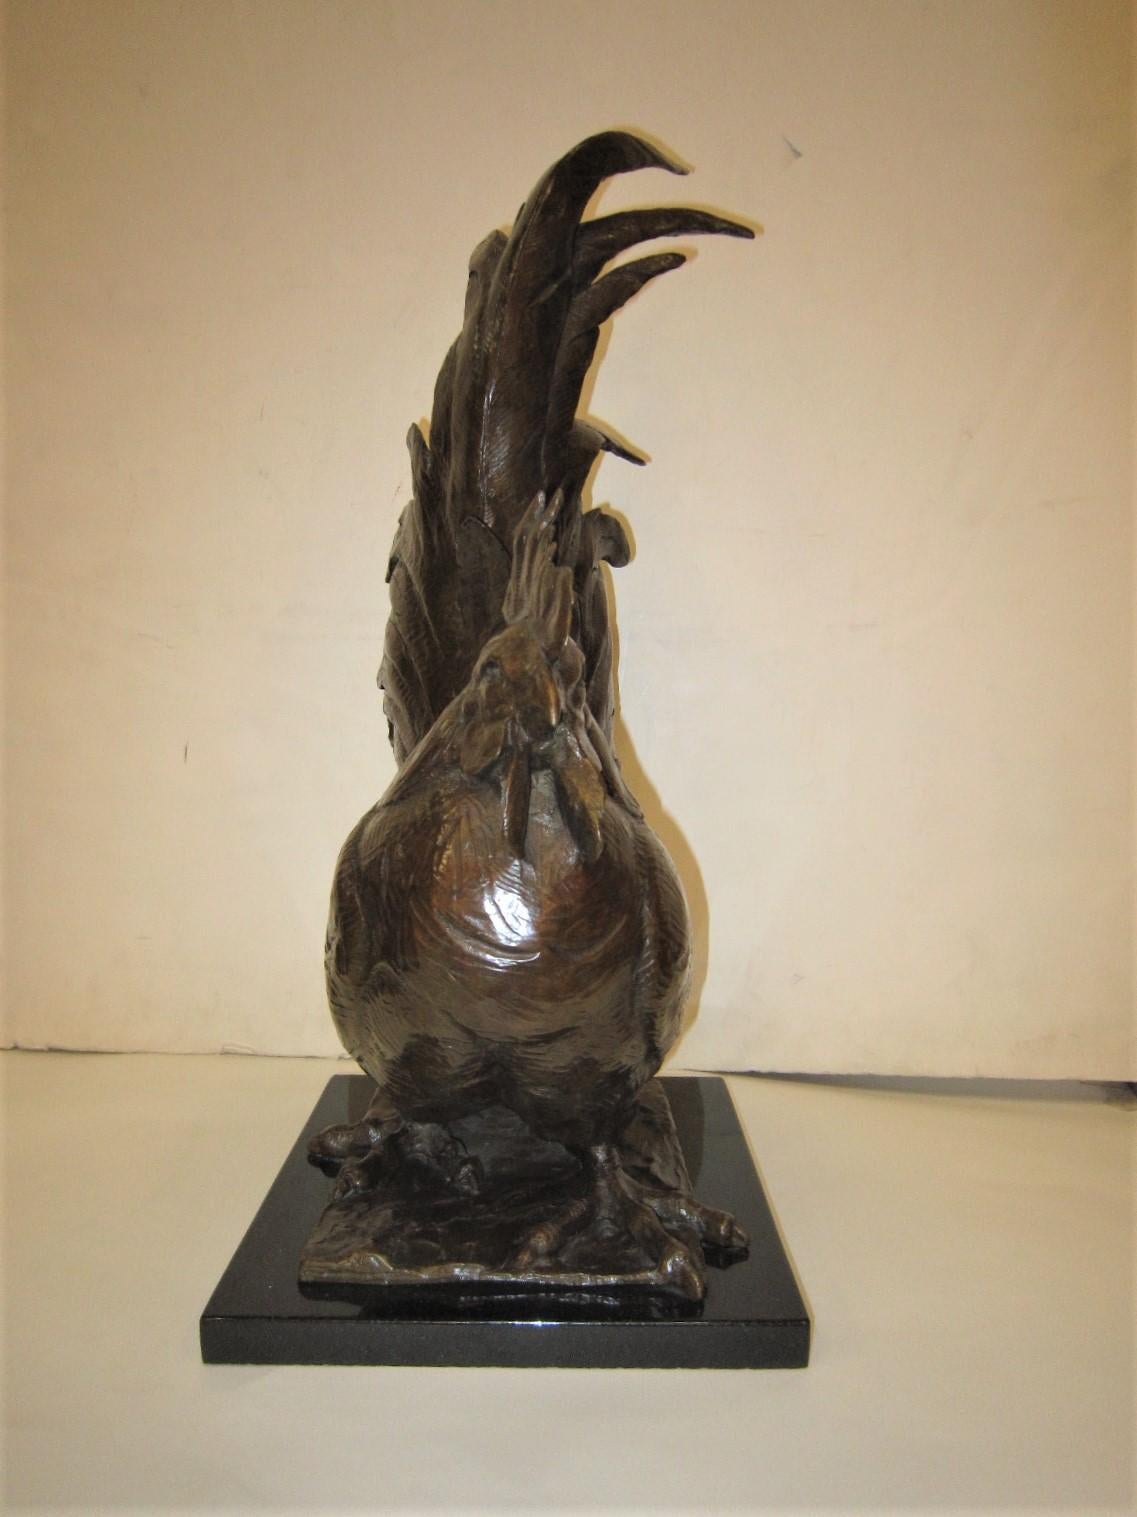 Contemporary American Original Bronze Sculpture of a Rooster by Dan Ostermiller